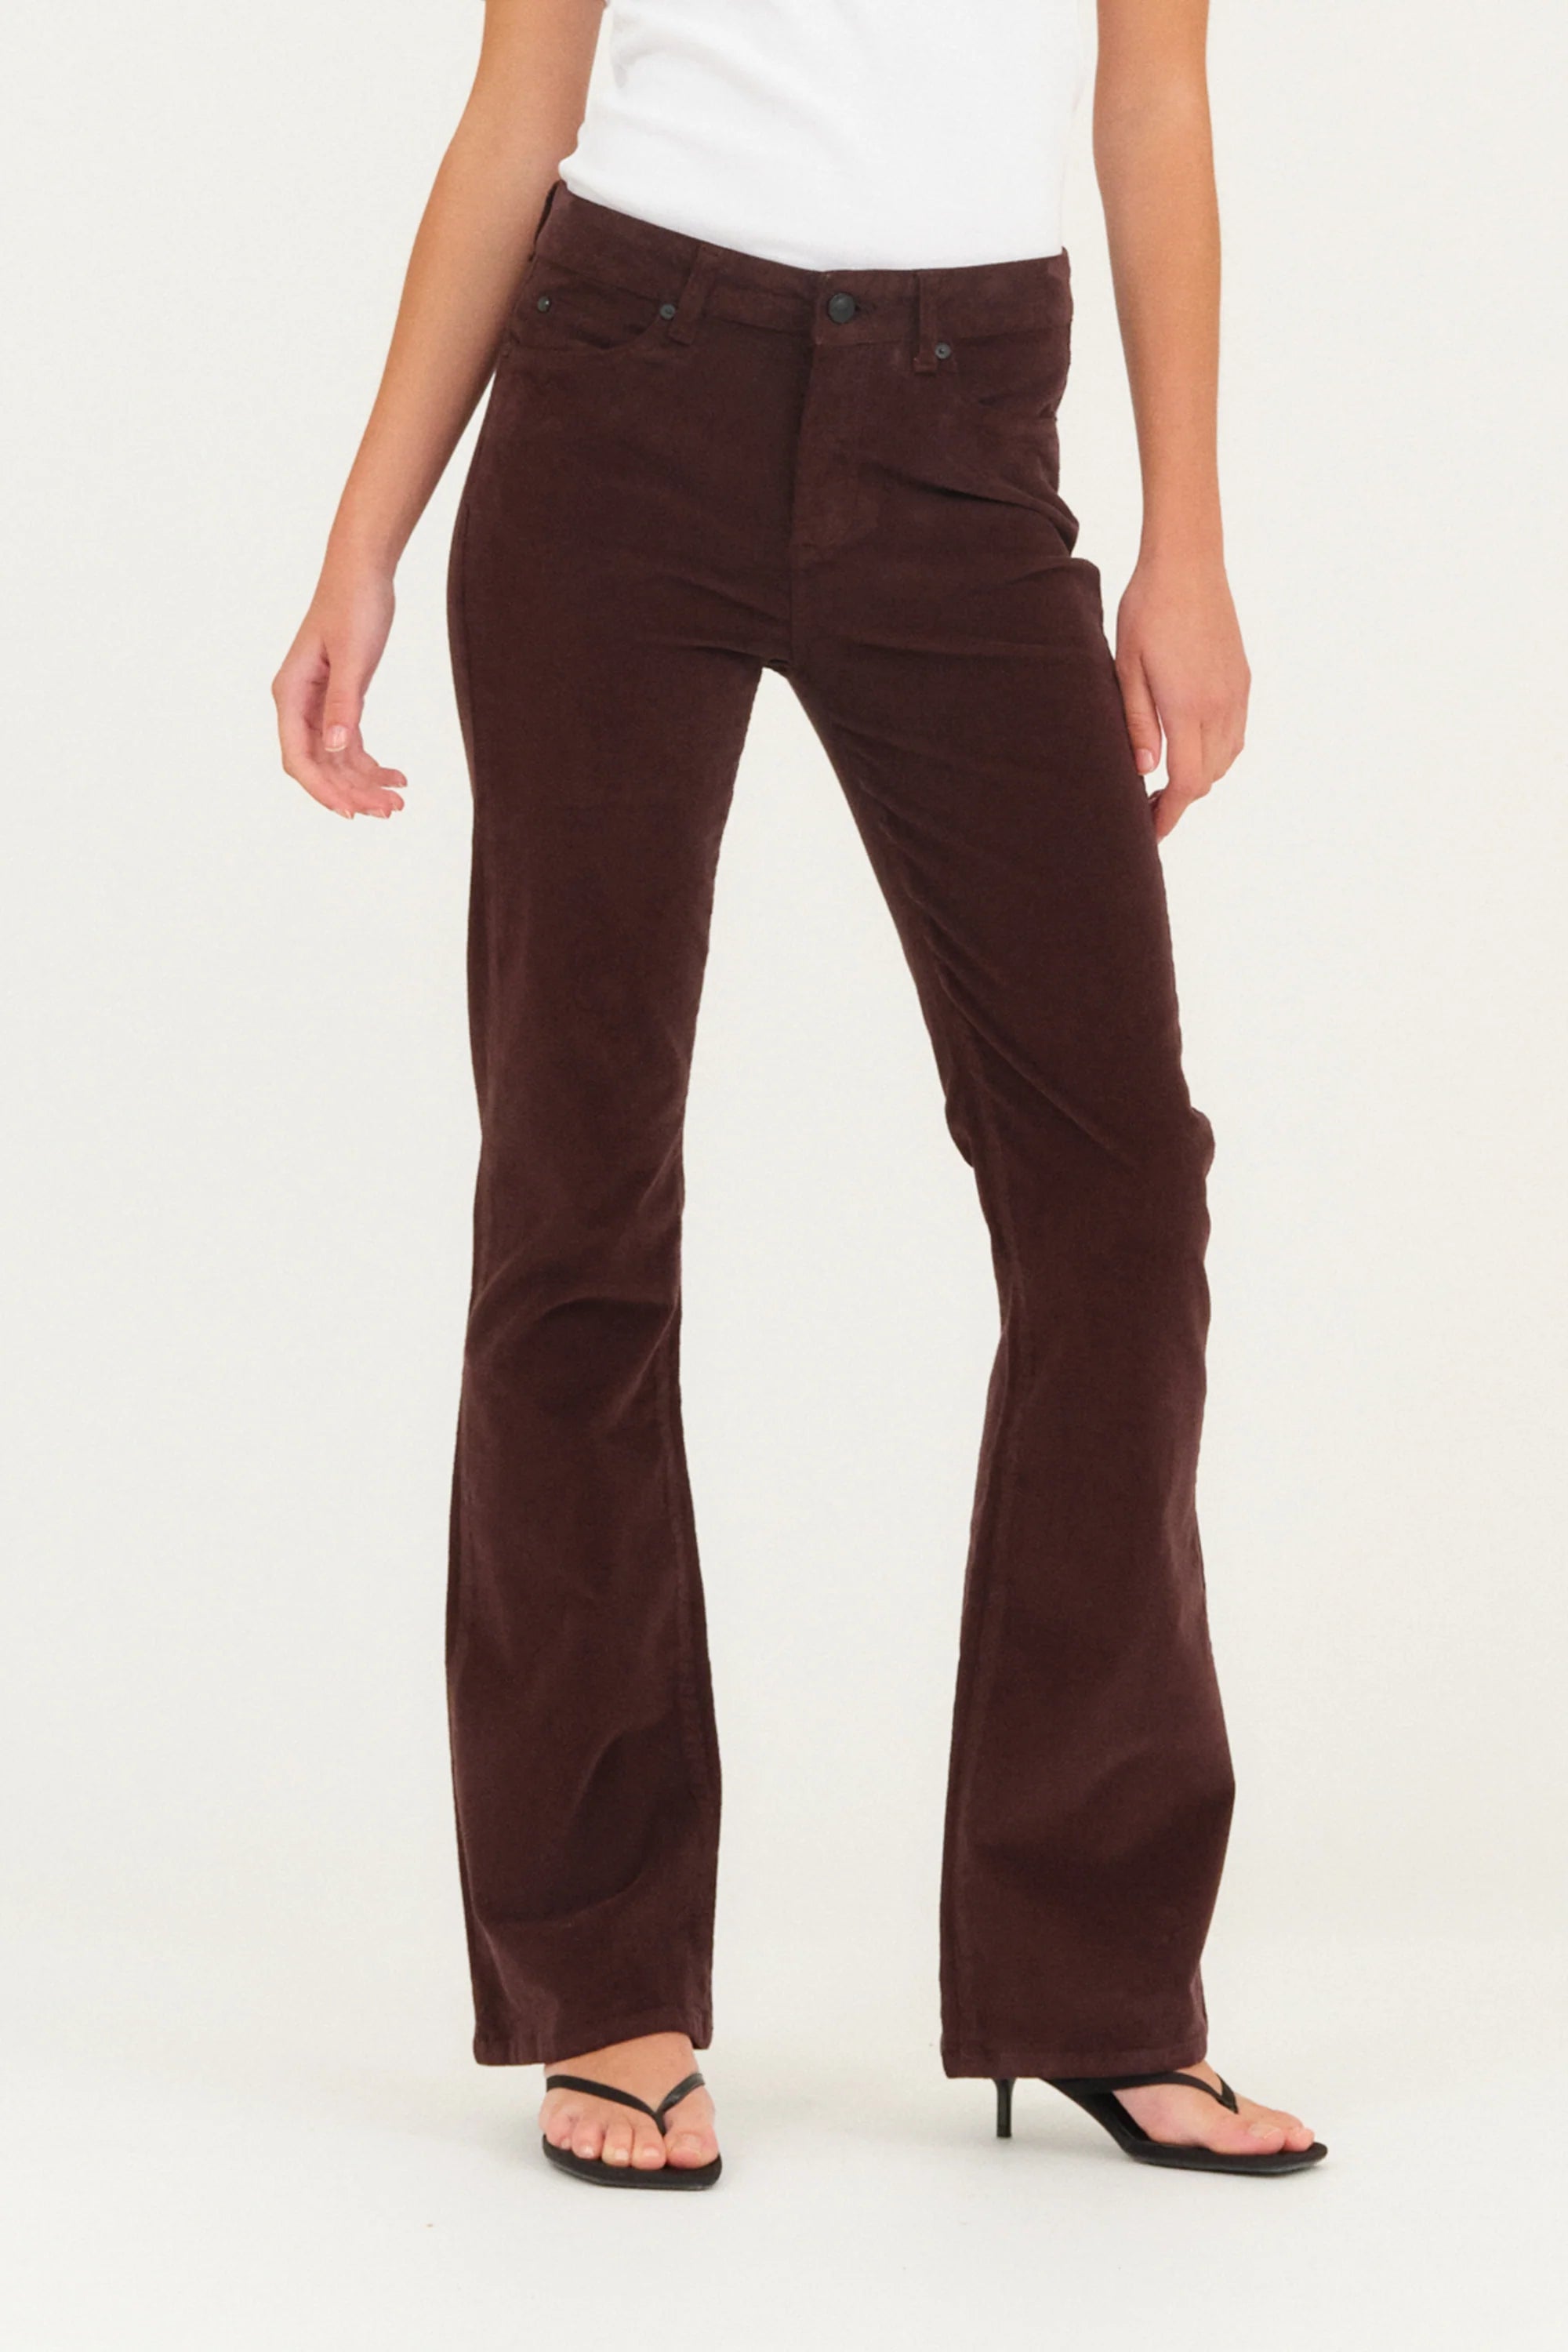 IVY-Tara Jeans Baby Cord - Expresso Brown